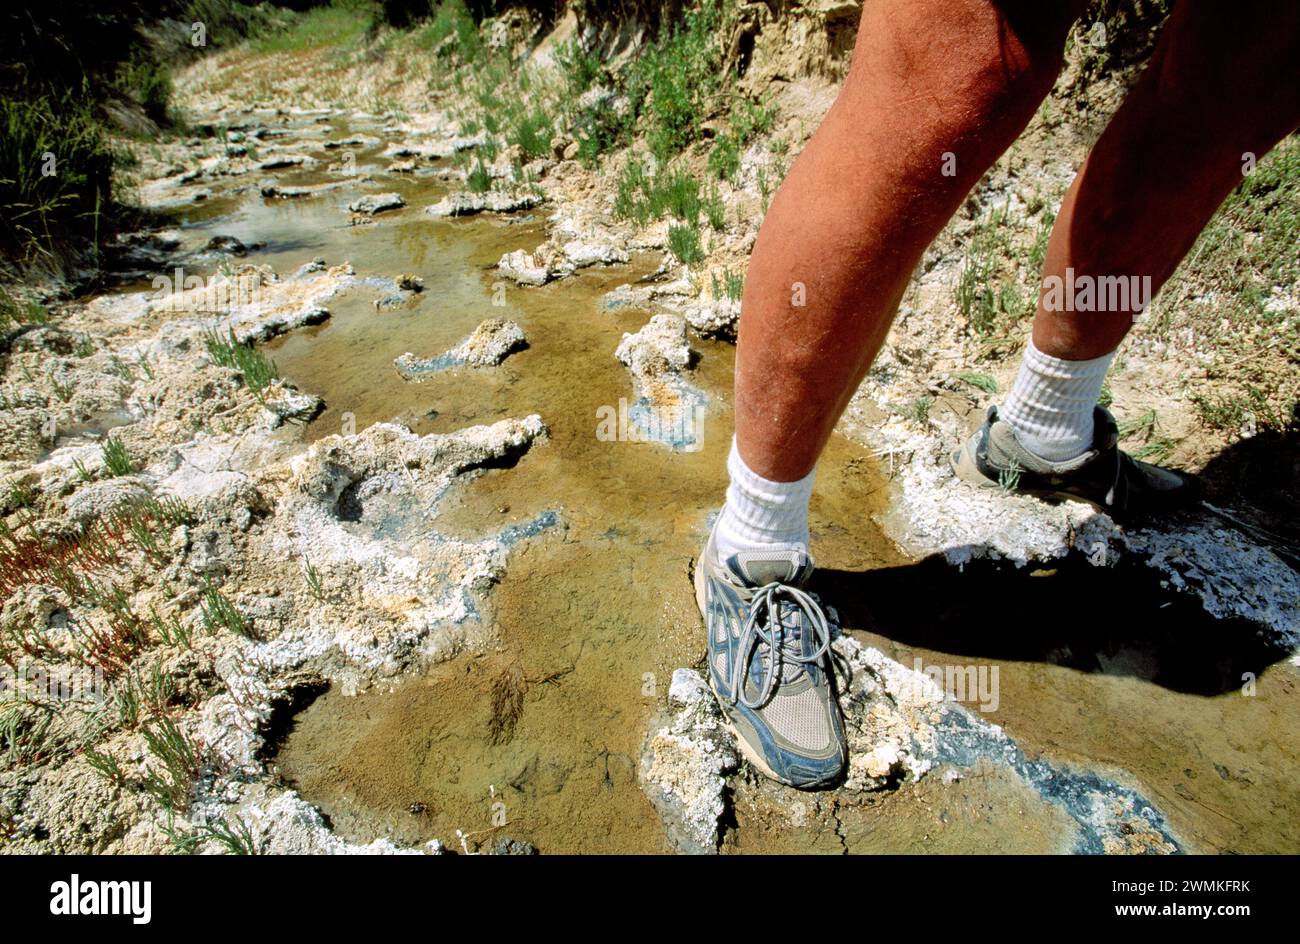 Man stands in a polluted stream; Wyoming, United States of America Stock Photo